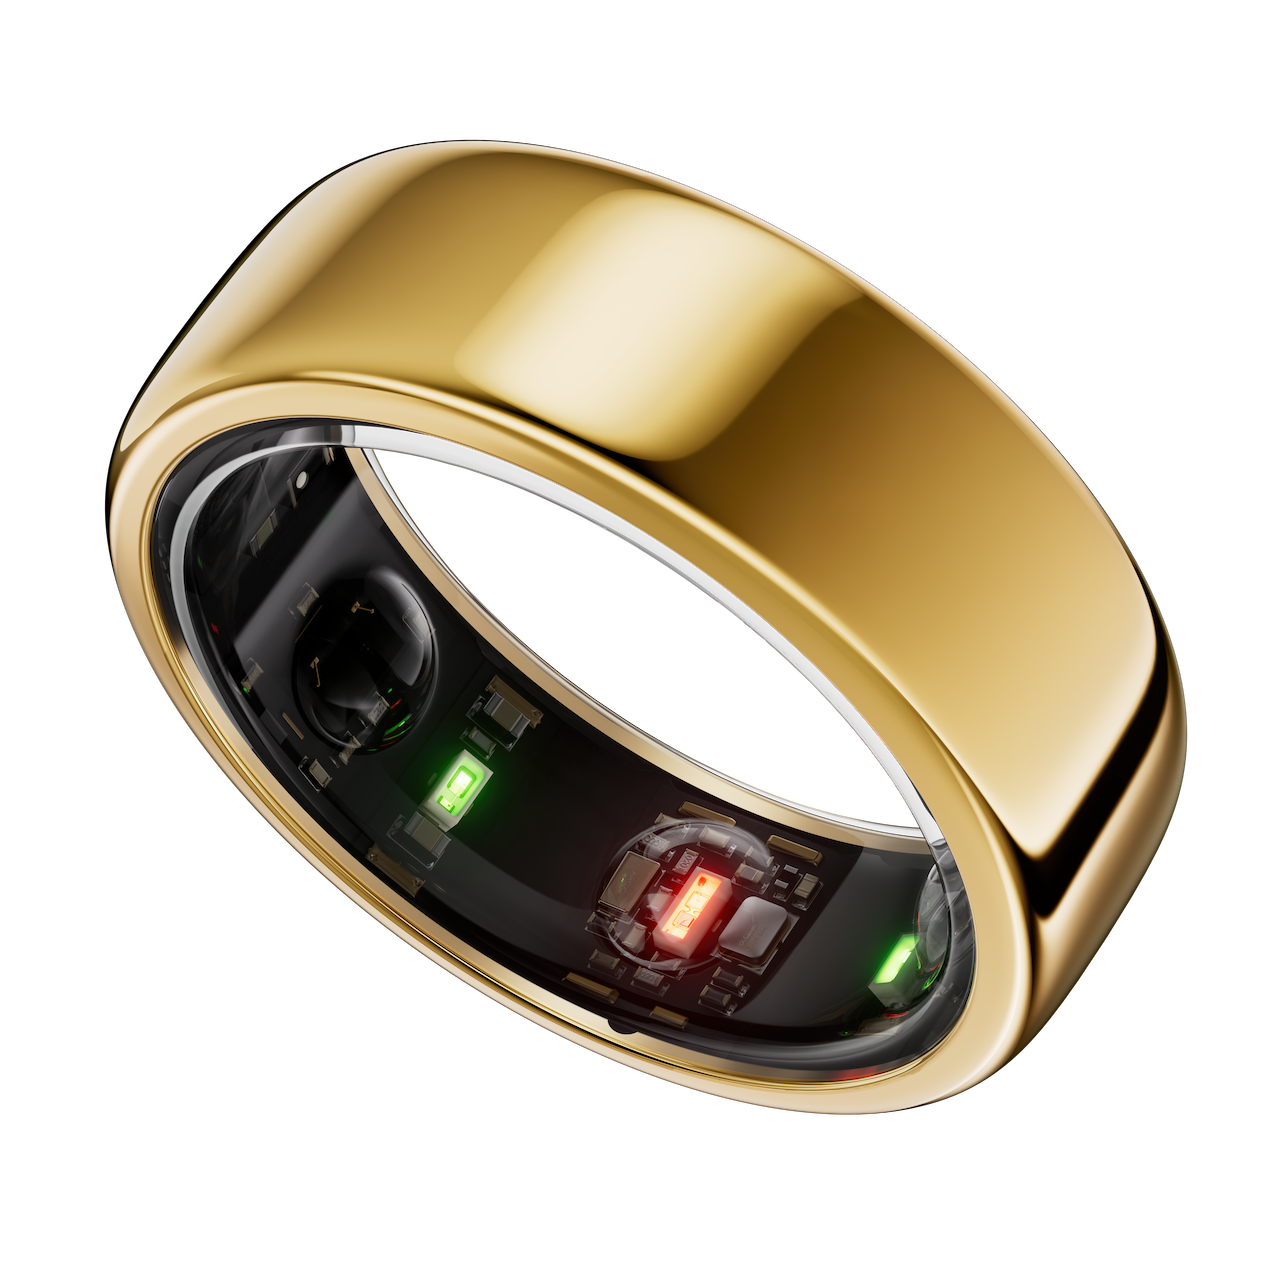 the gold horizon model oura ring generation 3 viewed from an angle